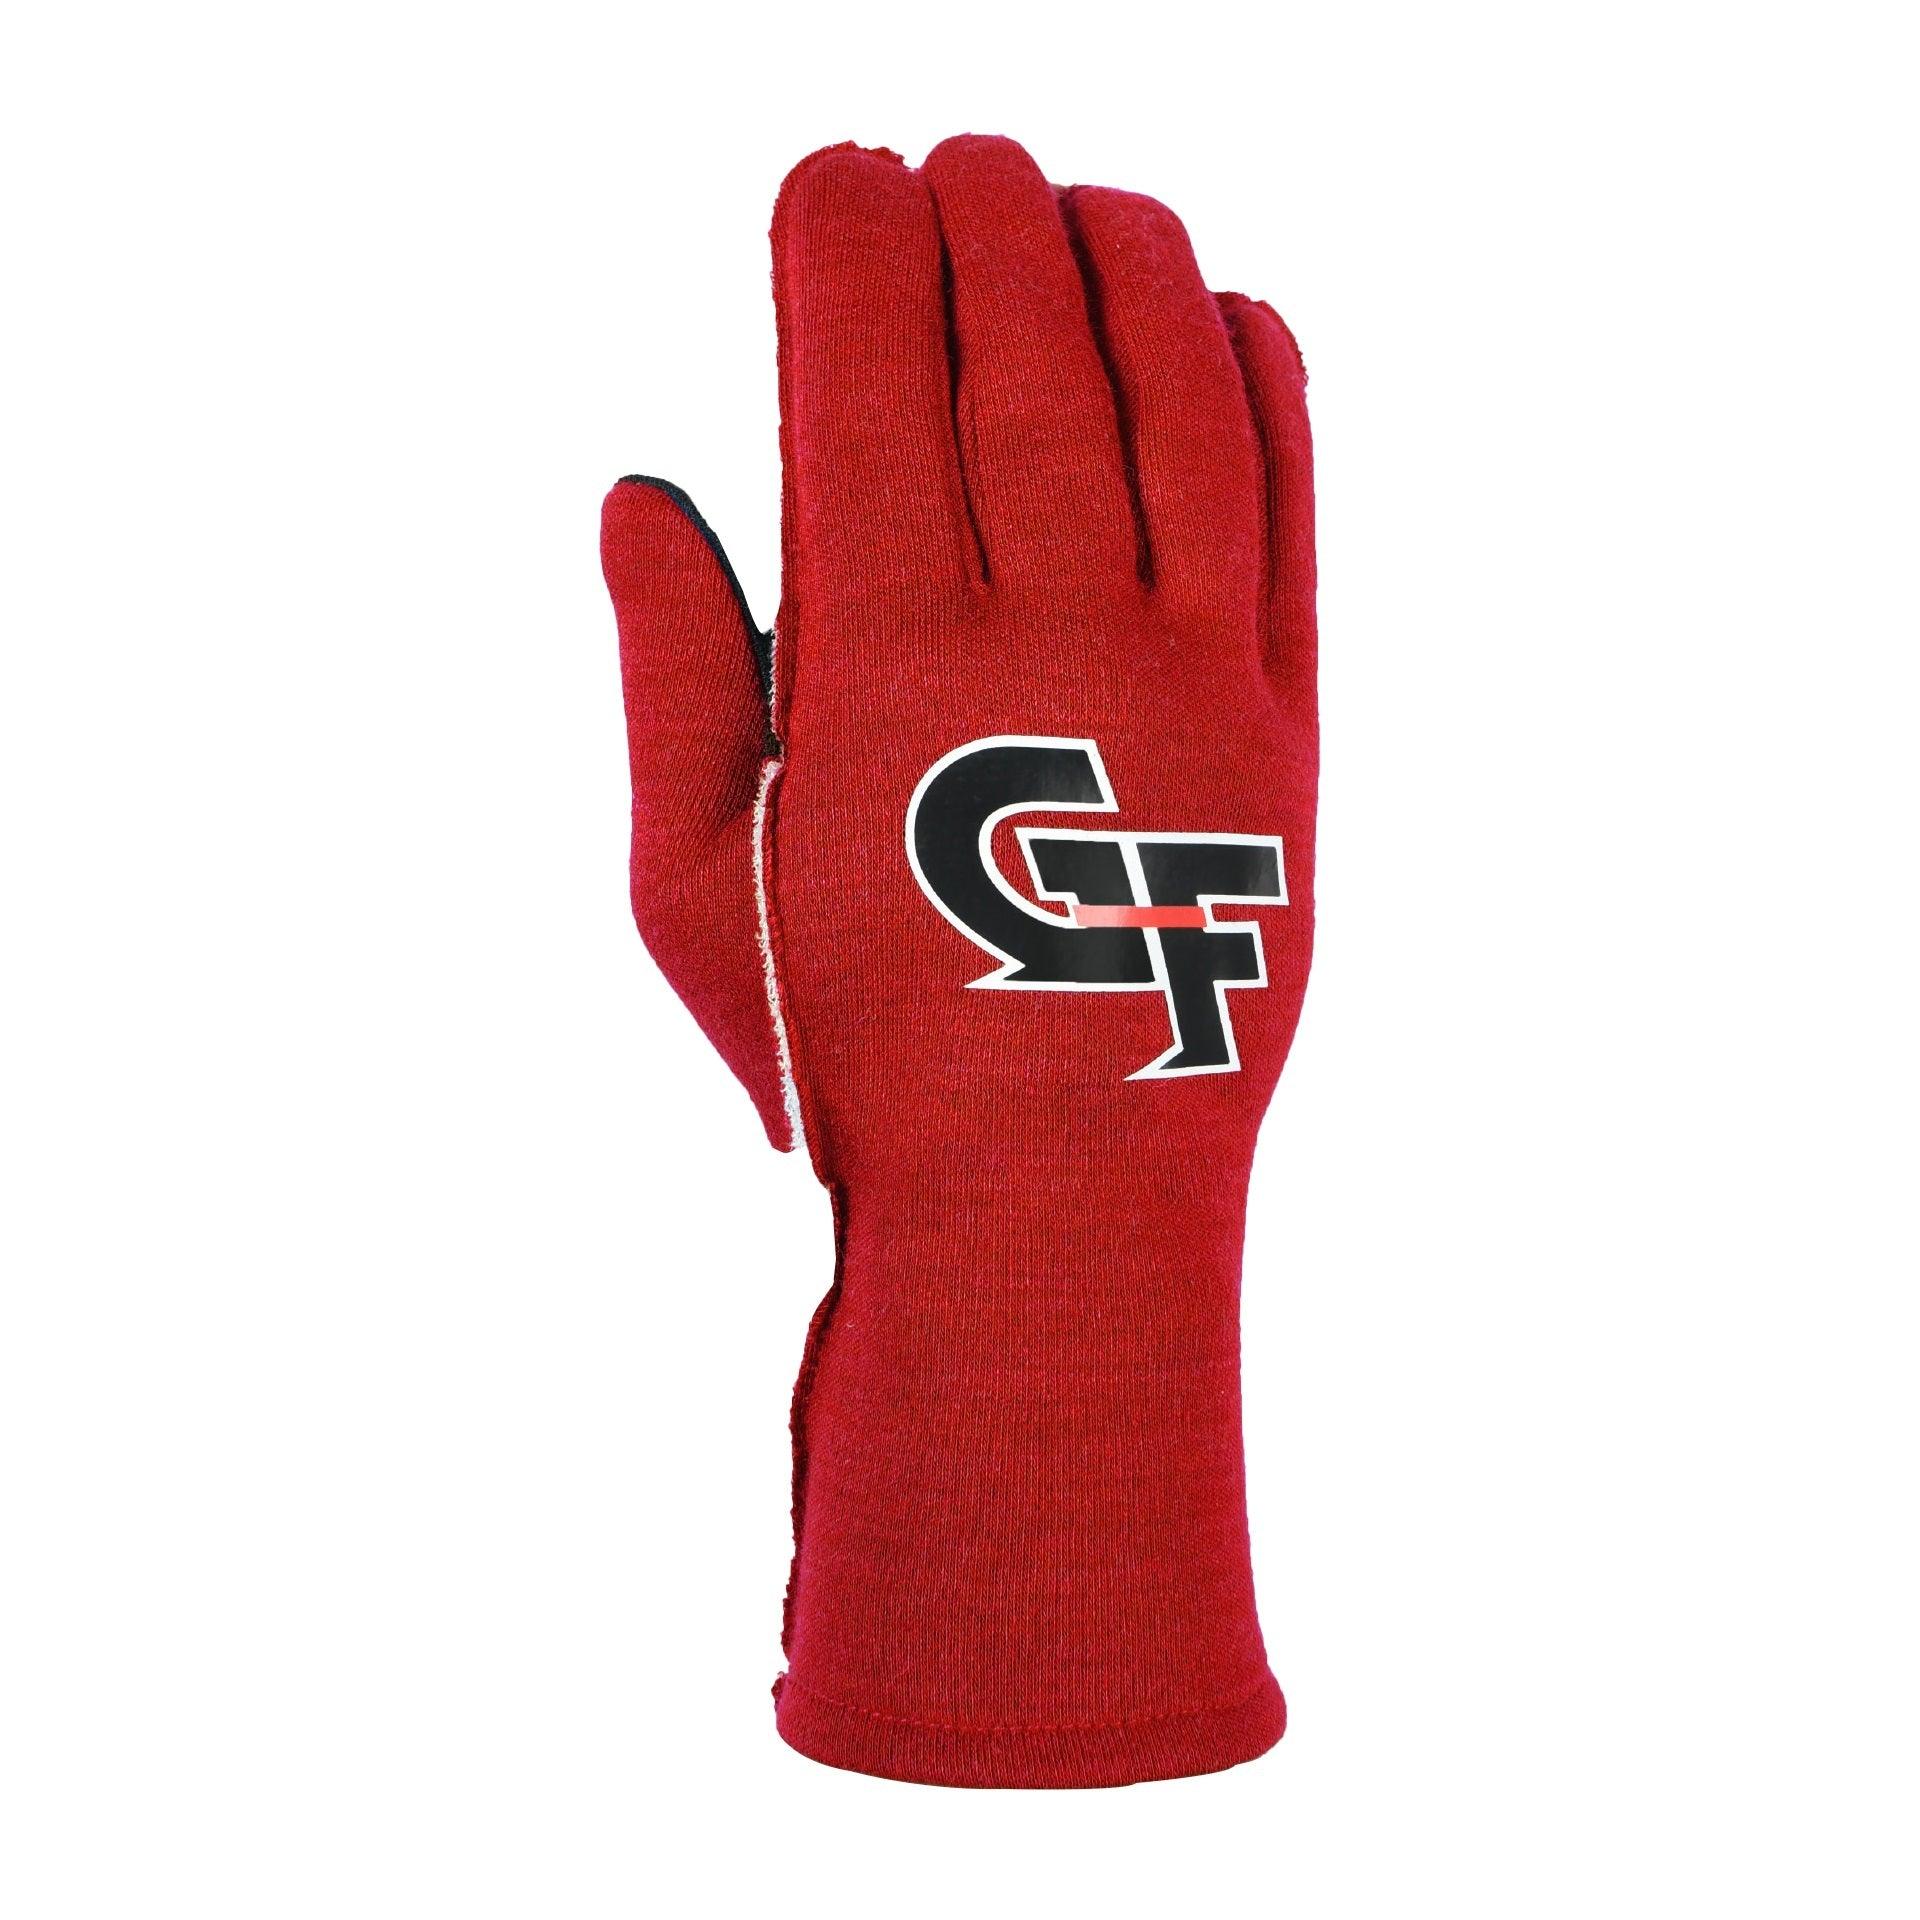 Gloves G-Limit X-Large Red - Burlile Performance Products